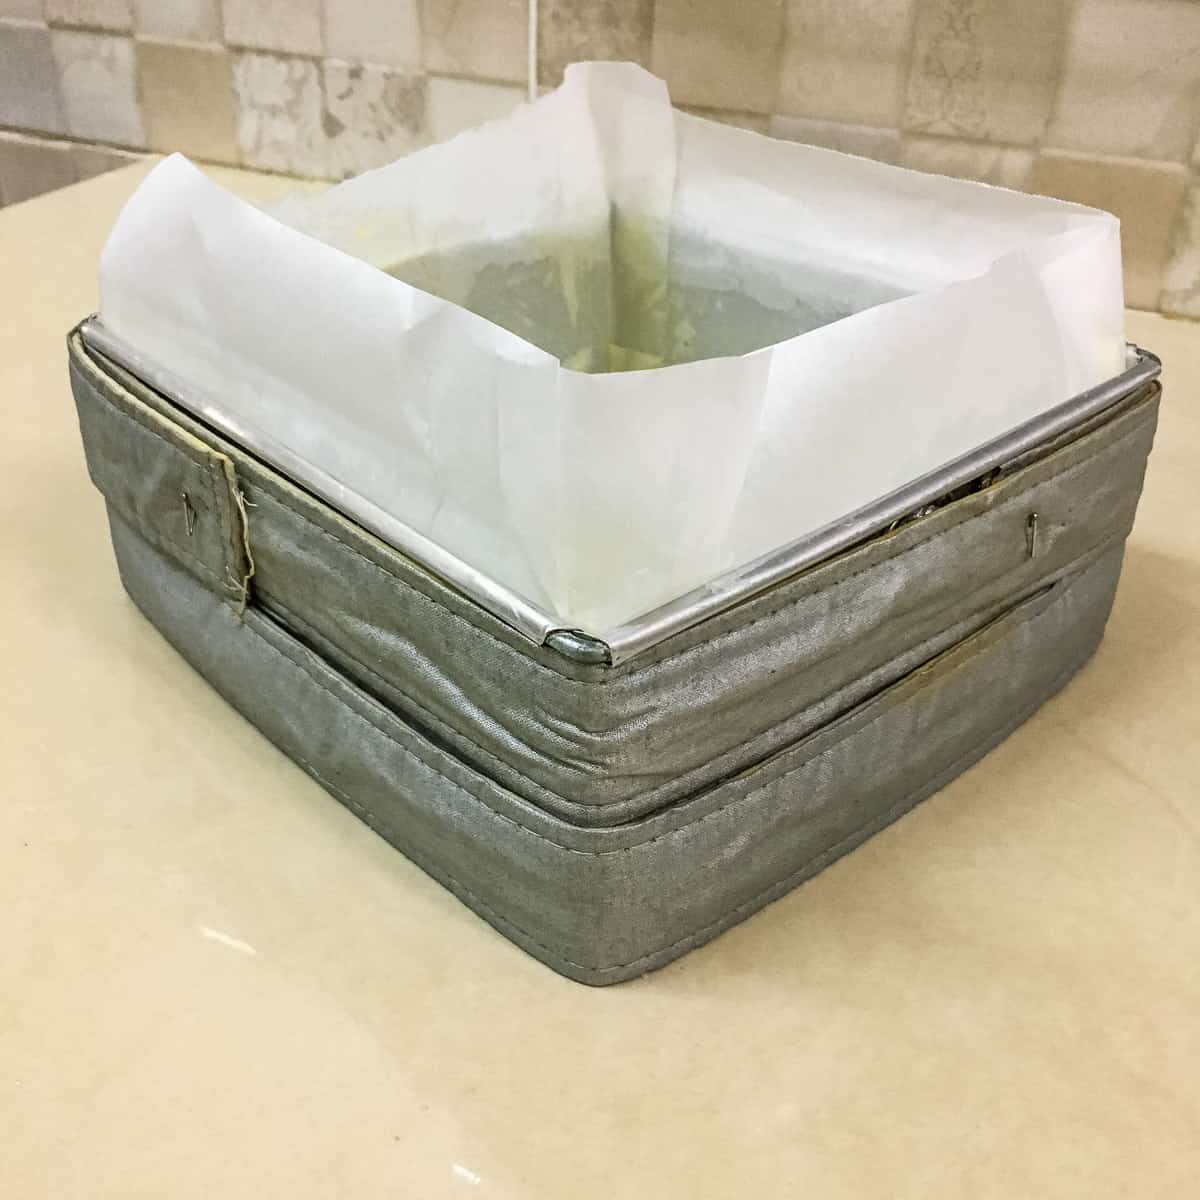 A square cake tin with parchment paper lining.